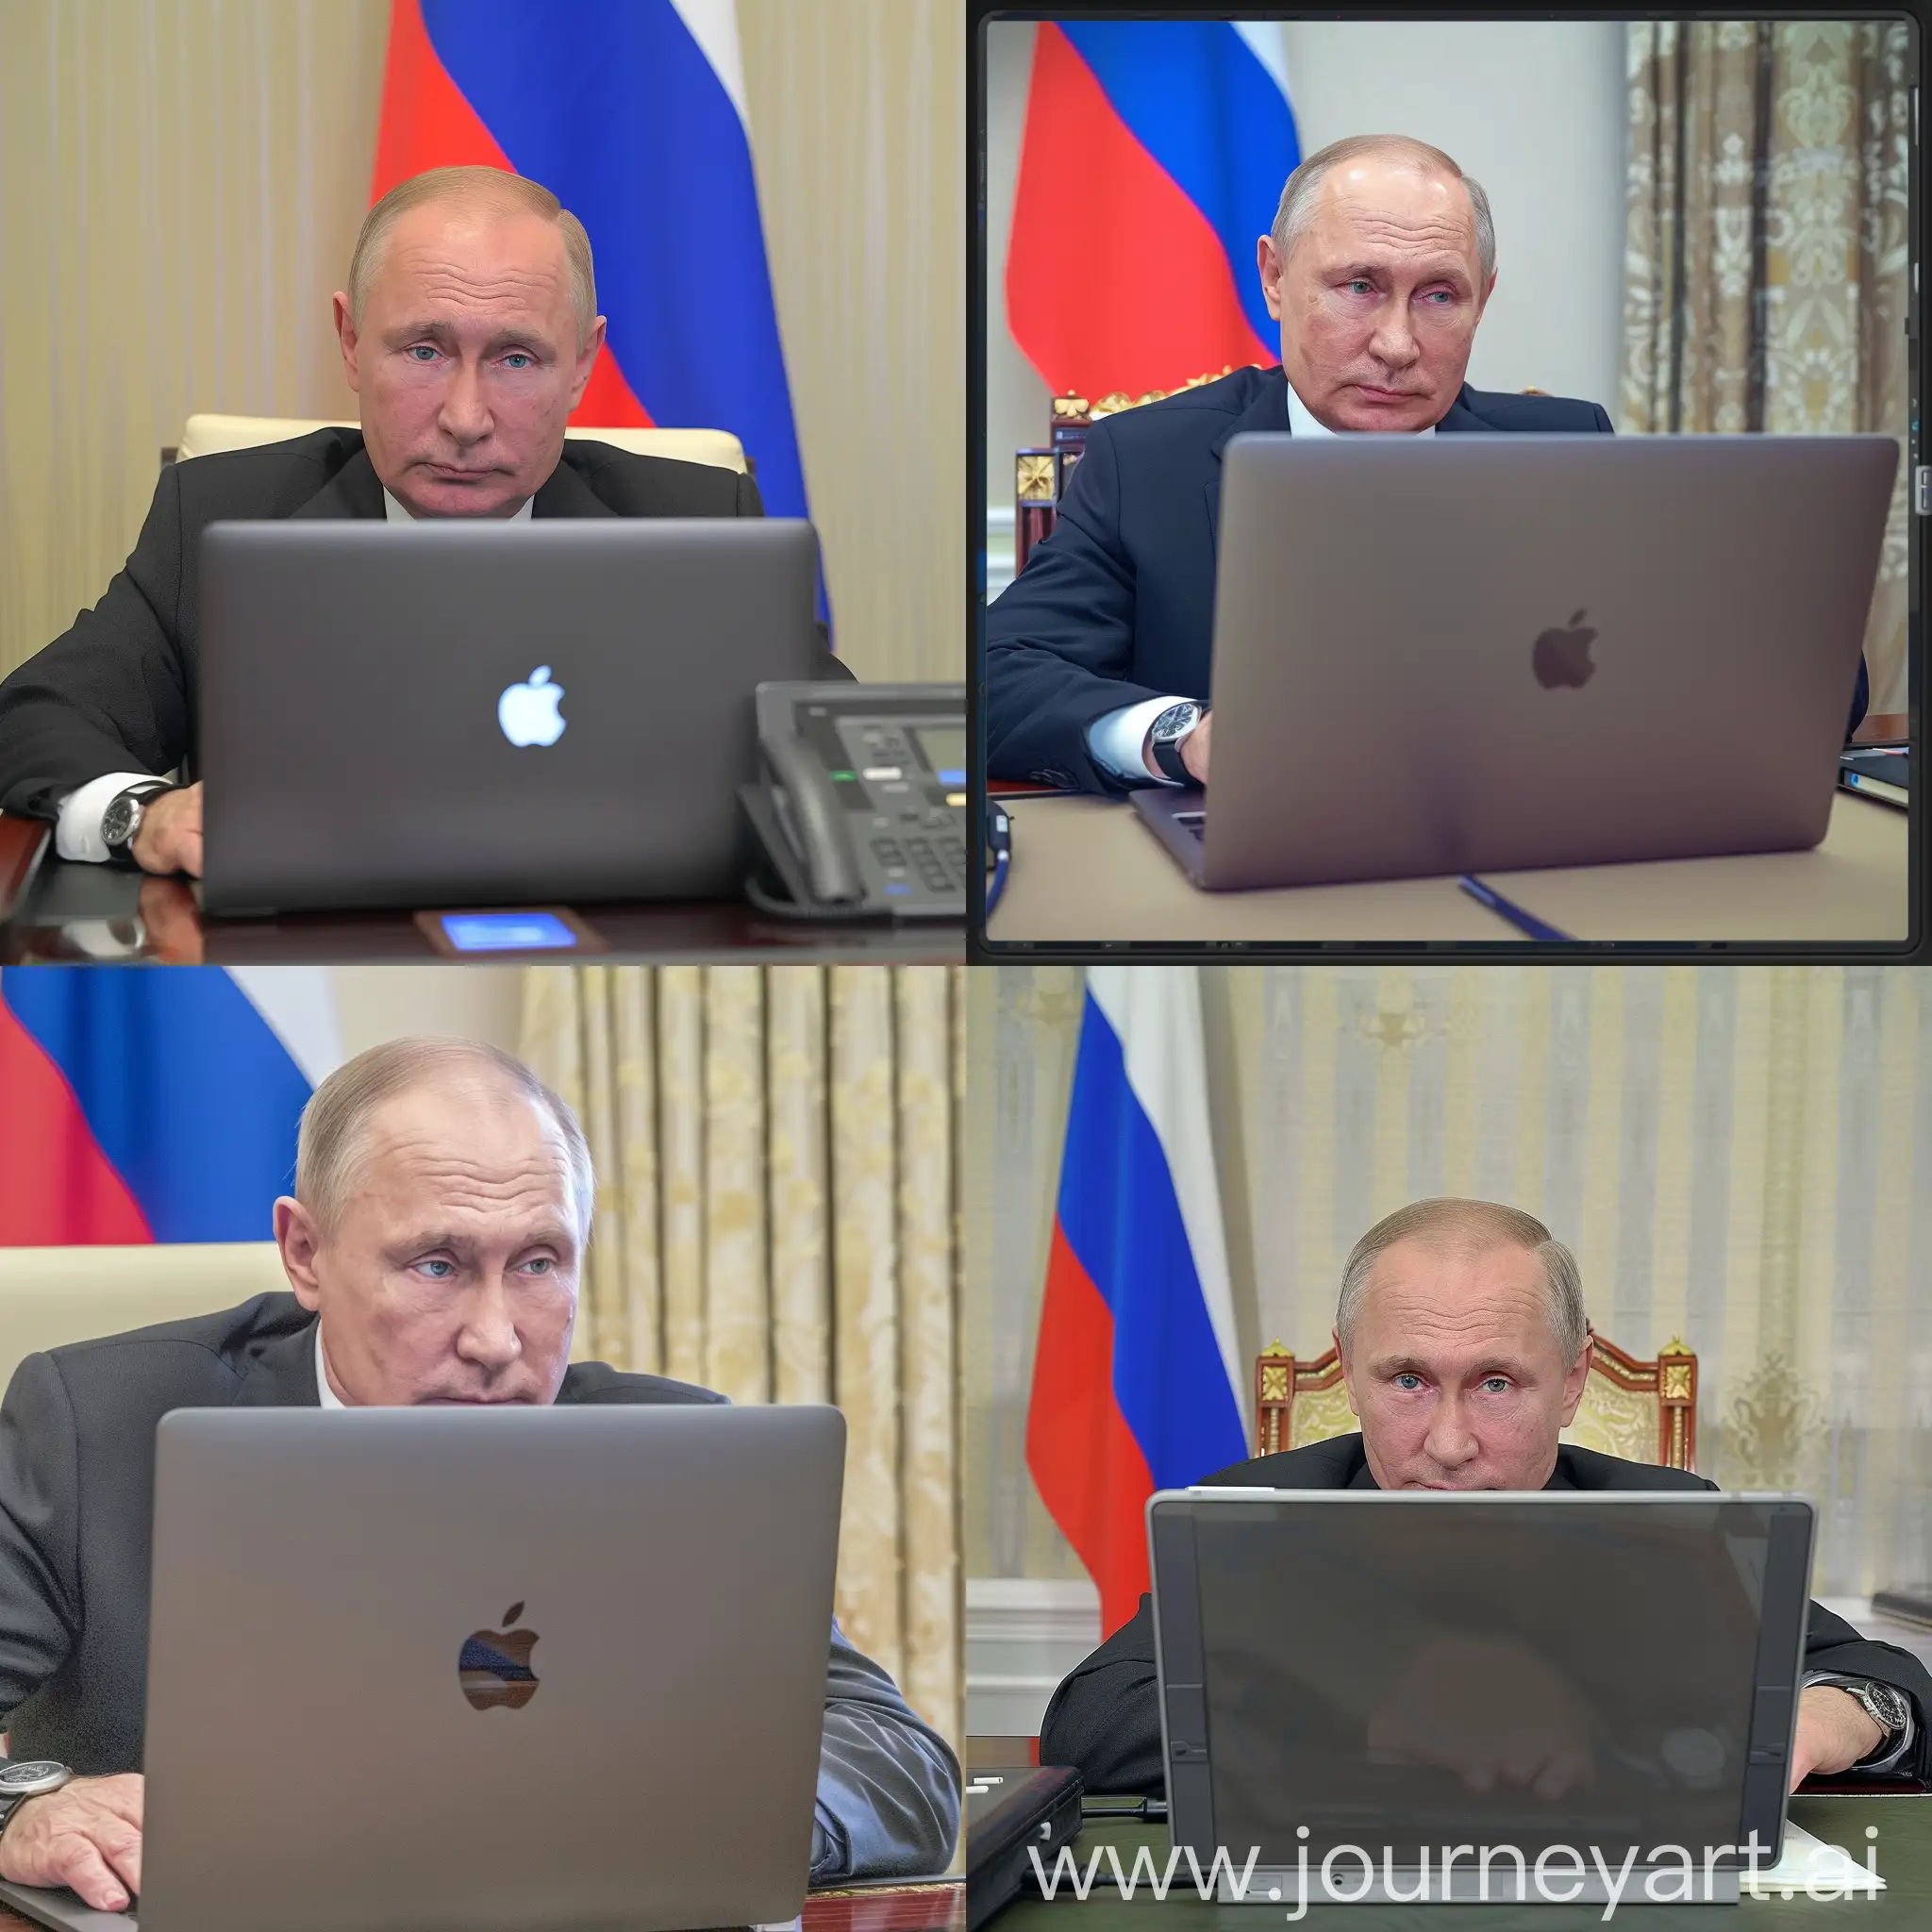 Vladimir-Putin-Working-on-MacBook-in-Presidents-Office-with-Russian-Flag-Background